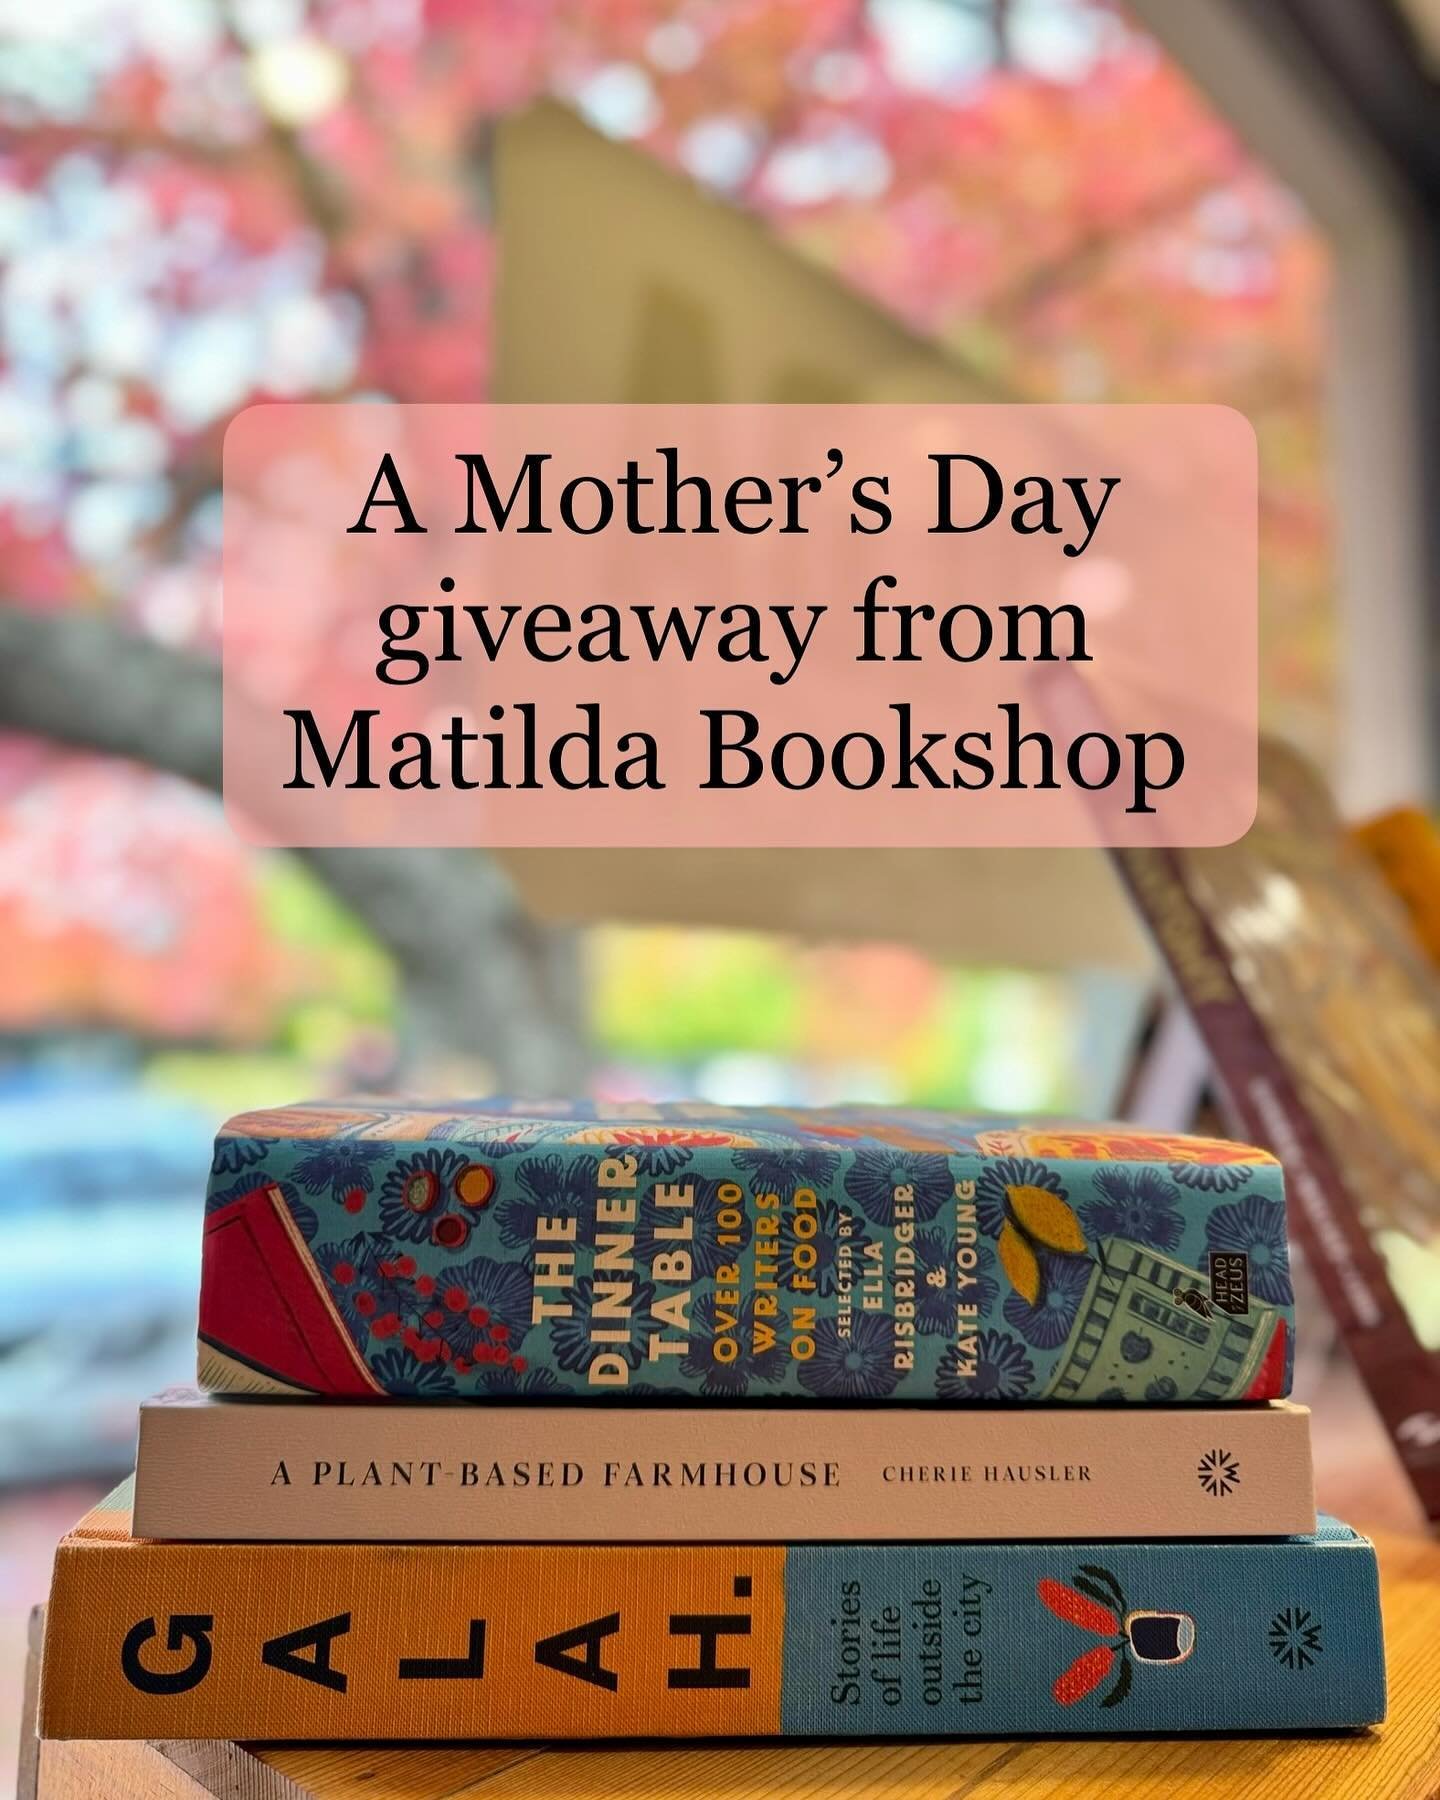 🍂🍁It&rsquo;s time to celebrate with Mother&rsquo;s Day approaching on Sunday, May 12! Here&rsquo;s your chance to win this set of beautiful gift and cooking books, perfect for a mum, or mother figure, in your life! 🍁🍂

To Win
&hearts;️ Make sure 